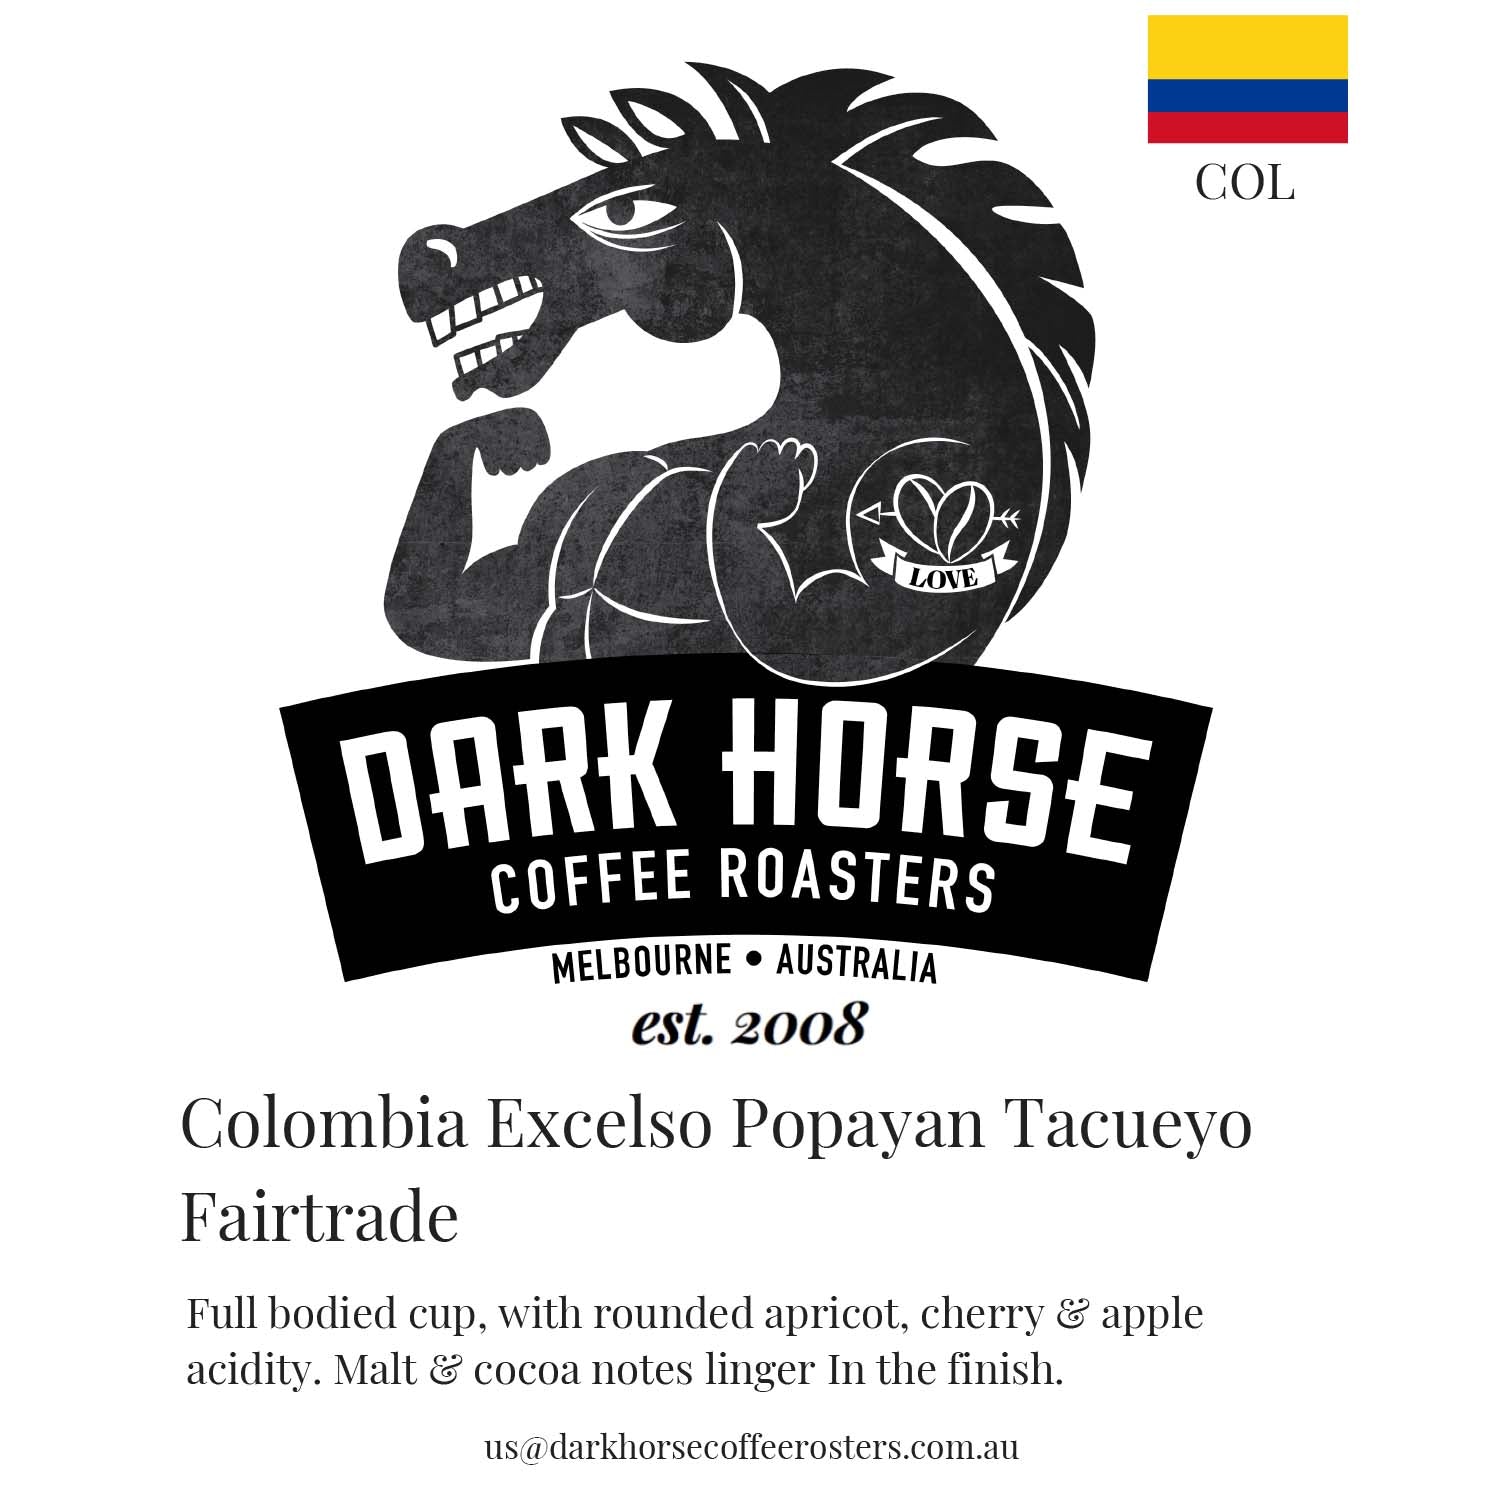 Colombian Excelso "Fairtrade"